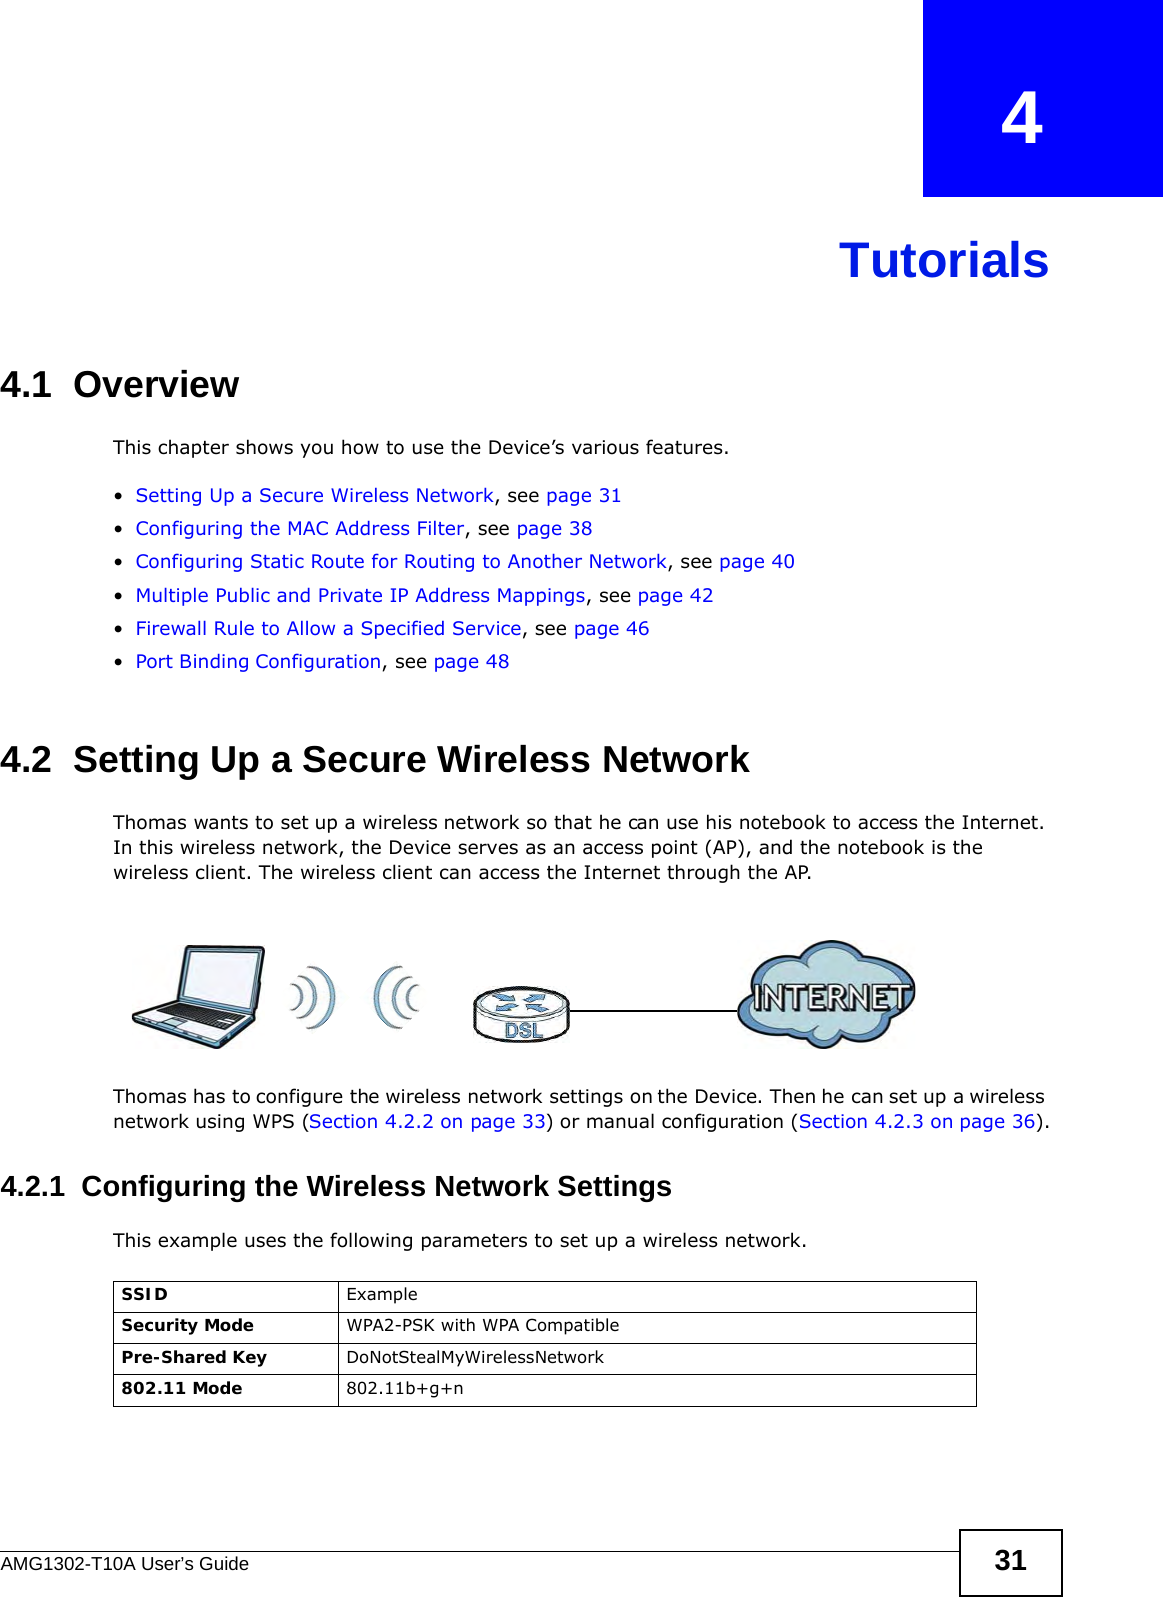 AMG1302-T10A User’s Guide 31CHAPTER   4Tutorials4.1  OverviewThis chapter shows you how to use the Device’s various features.•Setting Up a Secure Wireless Network, see page 31•Configuring the MAC Address Filter, see page 38•Configuring Static Route for Routing to Another Network, see page 40•Multiple Public and Private IP Address Mappings, see page 42•Firewall Rule to Allow a Specified Service, see page 46•Port BindingConfiguration, see page 484.2  Setting Up a Secure Wireless NetworkThomas wants to set up a wireless network so that he can use his notebook to access the Internet. In this wireless network, the Device serves as an access point (AP), and the notebook is the wireless client. The wireless client can access the Internet through the AP.Thomas has to configure the wireless network settings on the Device. Then he can set up a wireless network using WPS (Section 4.2.2 on page 33) or manual configuration (Section 4.2.3 on page 36).4.2.1  Configuring the Wireless Network SettingsThis example uses the following parameters to set up a wireless network.SSID ExampleSecurity Mode WPA2-PSK with WPA CompatiblePre-Shared Key DoNotStealMyWirelessNetwork802.11 Mode 802.11b+g+n